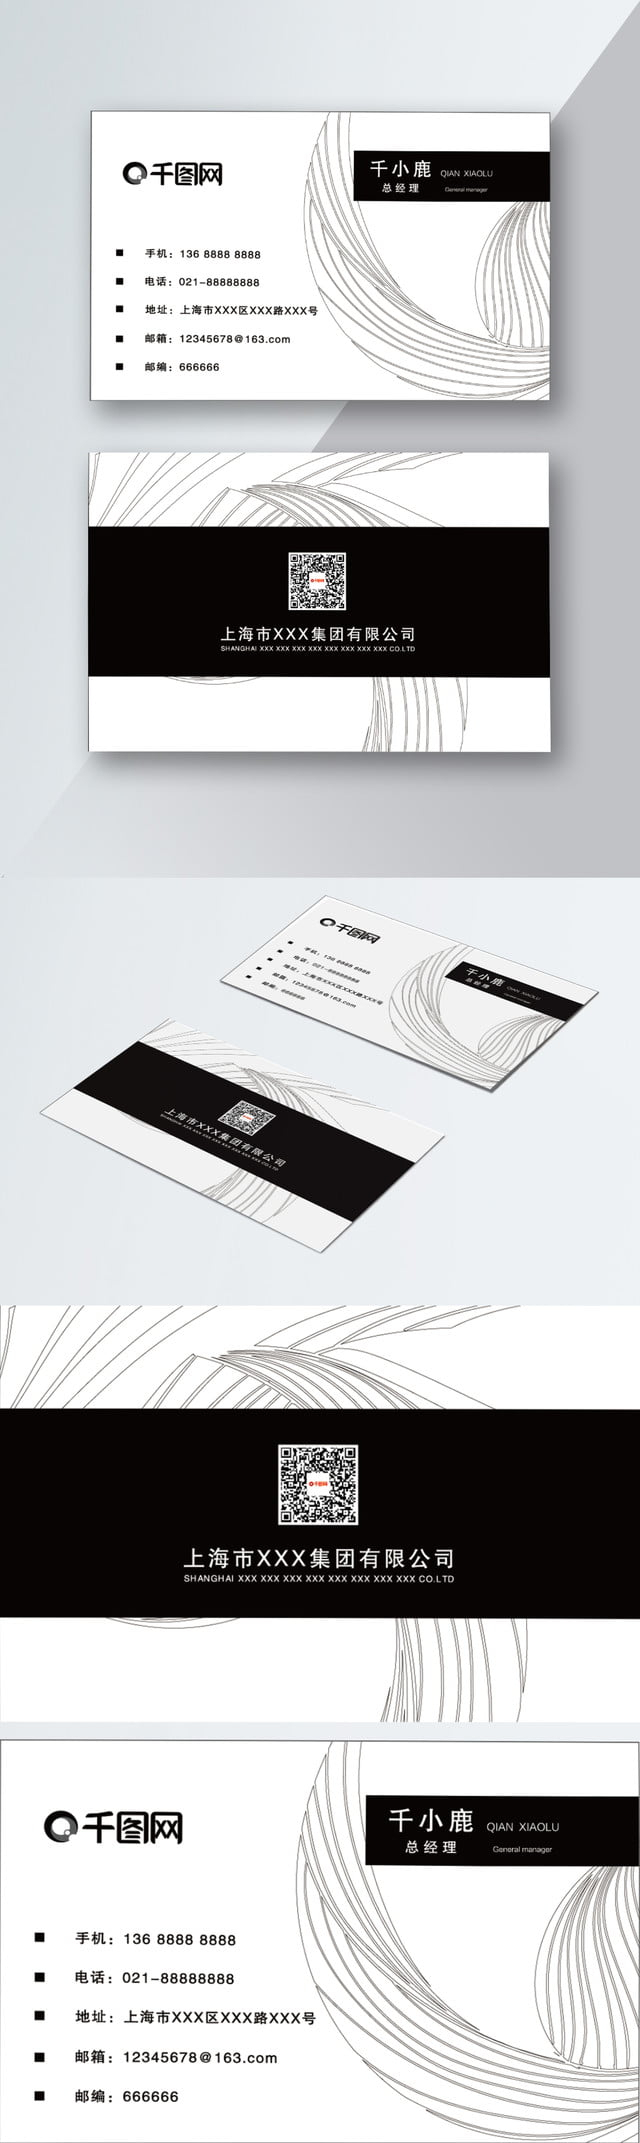 Hairdressing Business Card Hairdressing Business Card Design With Hairdresser Business Card Templates Free